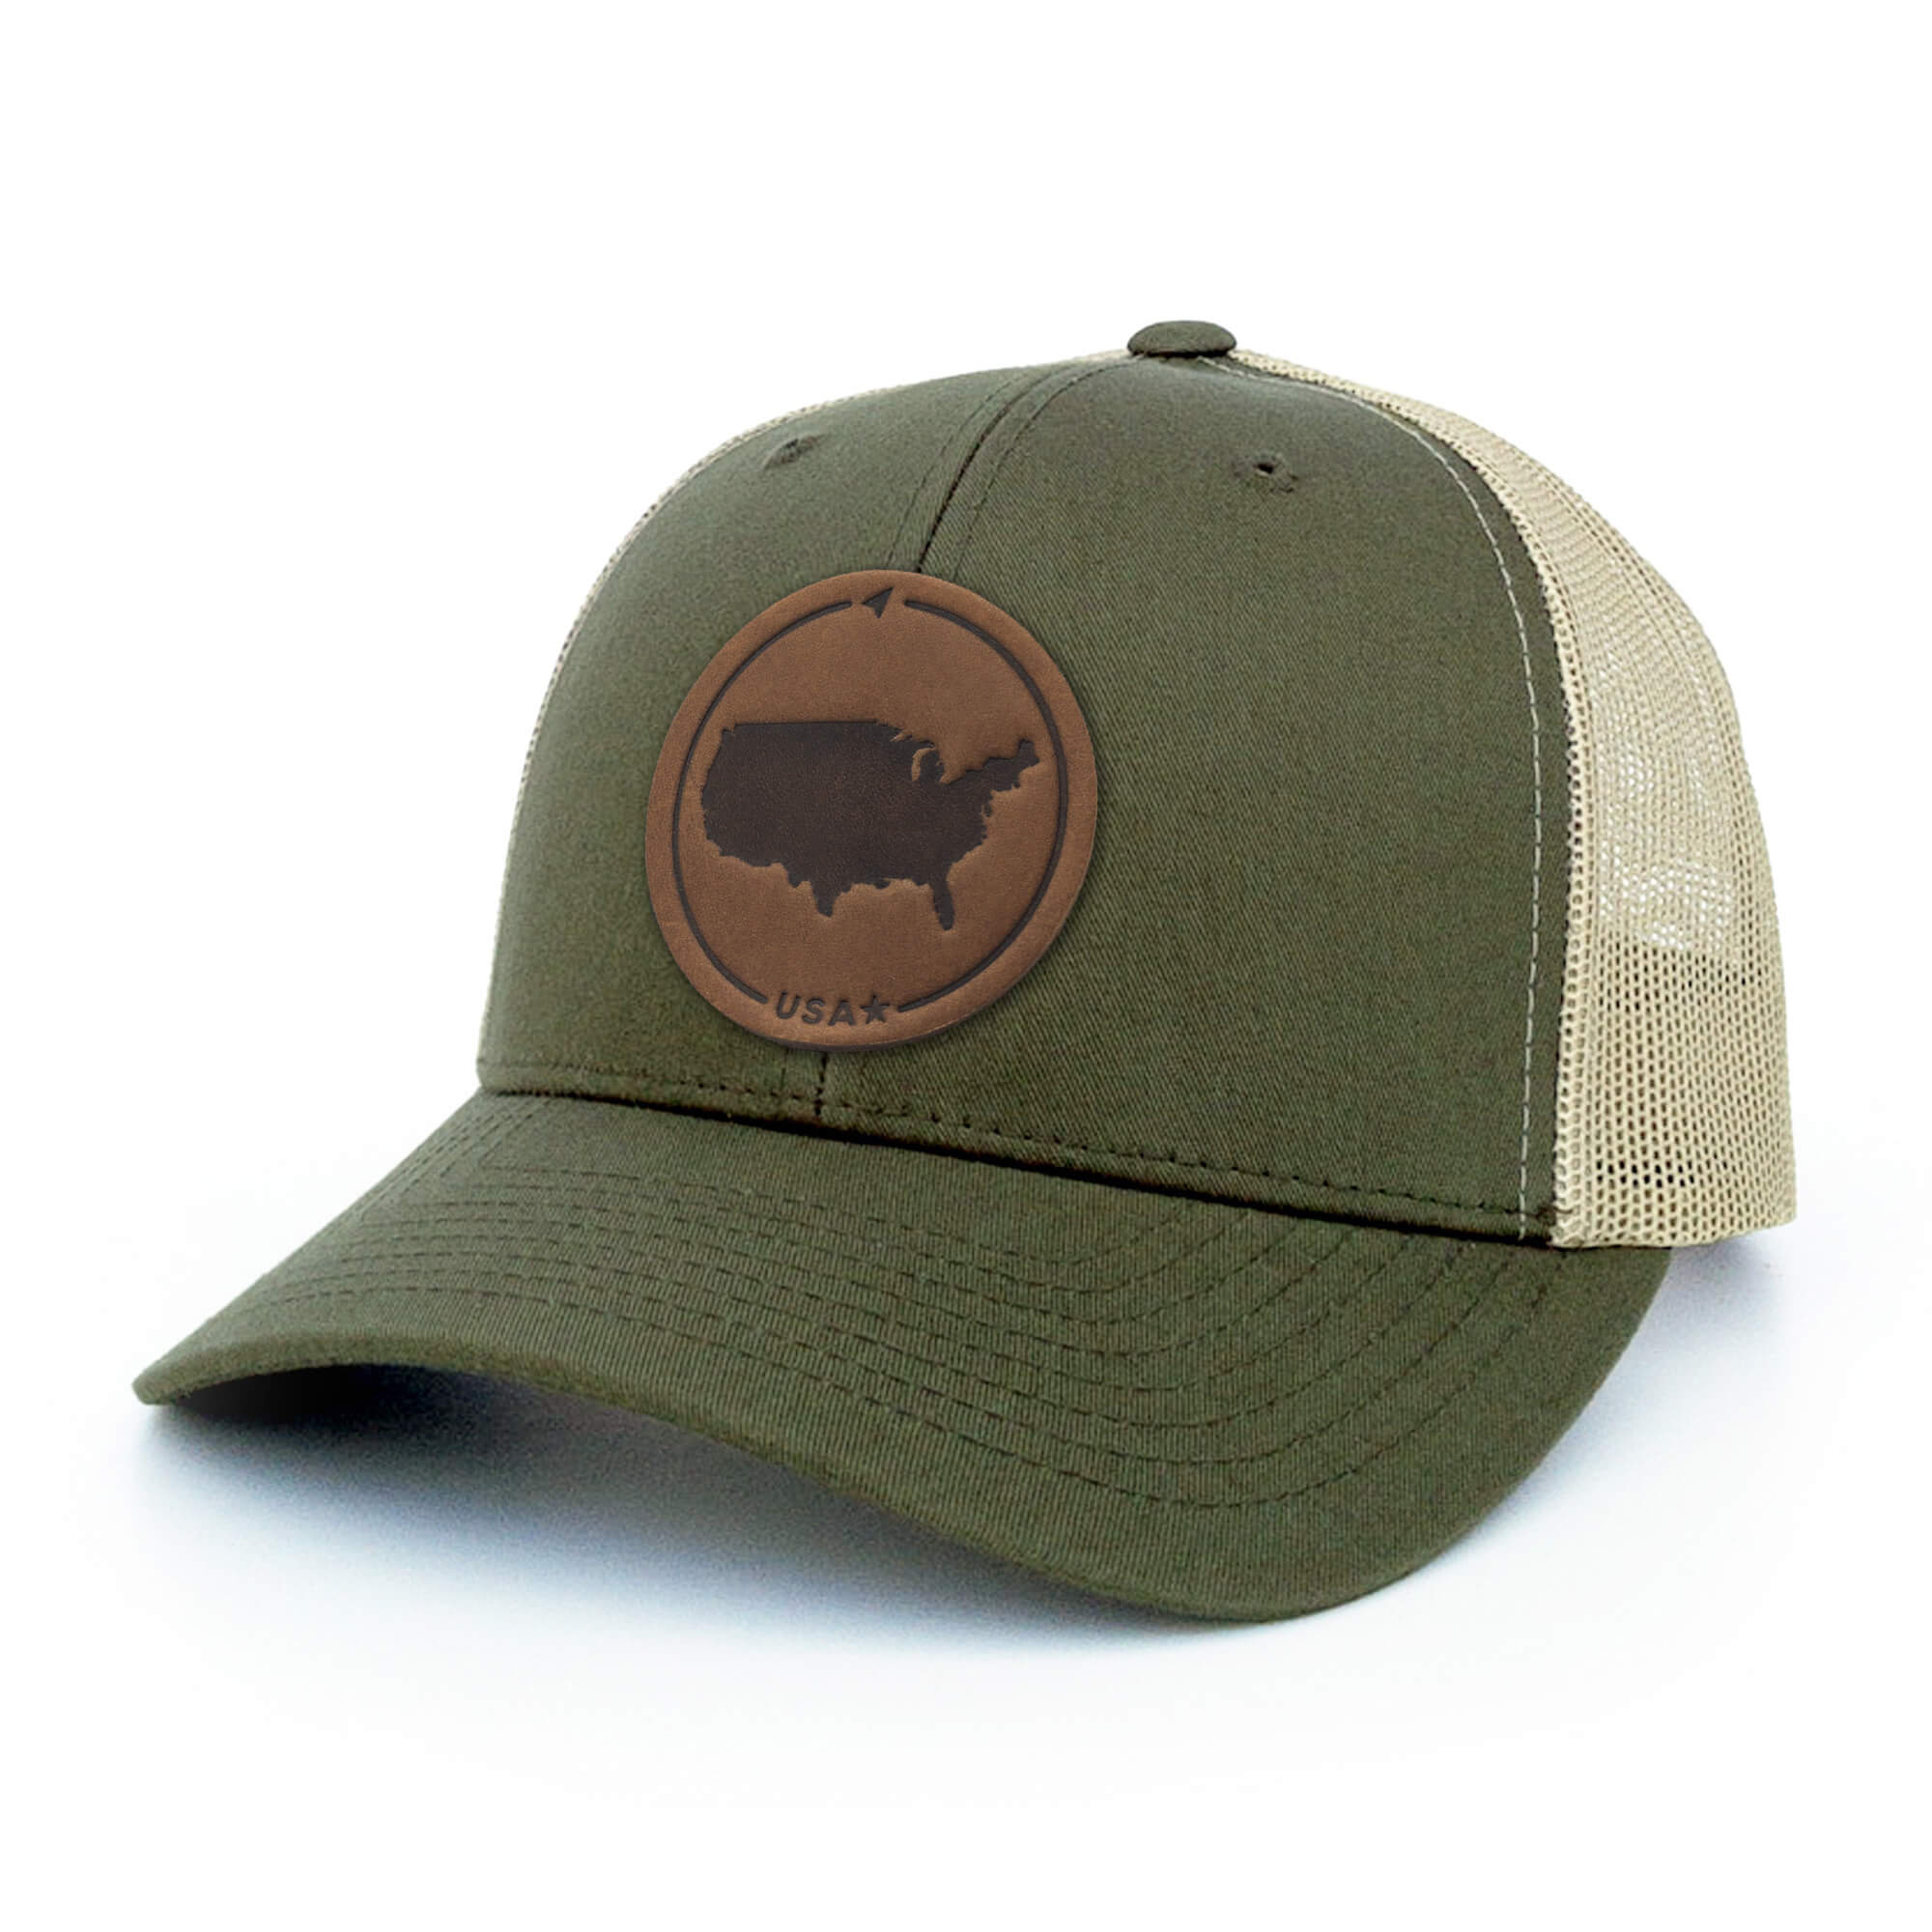 Moss Green and khaki trucker hat with full-grain leather patch of USA | BLACK-003-001, CHARC-003-001, NAVY-003-001, HGREY-003-001, MOSS-003-001, BROWN-003-001